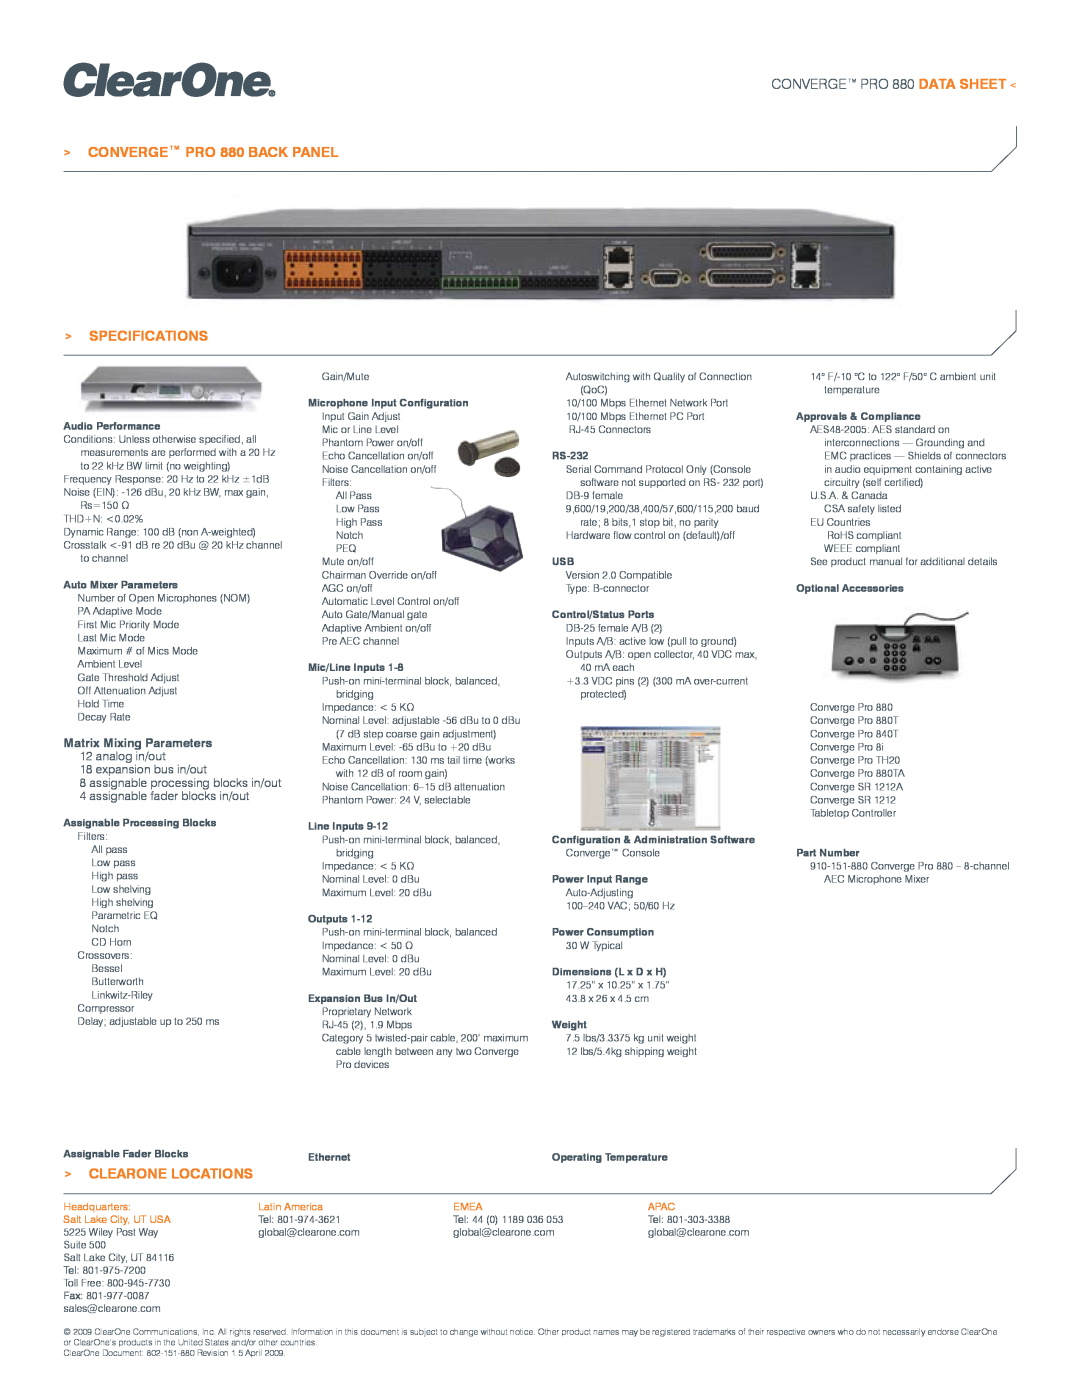 ClearOne comm CONVERGE PRO 880 BACK PANEL SPECIFICATIONS, Clearone Locations, CONVERGE PRO 880 DATA SHEET, Headquarters 